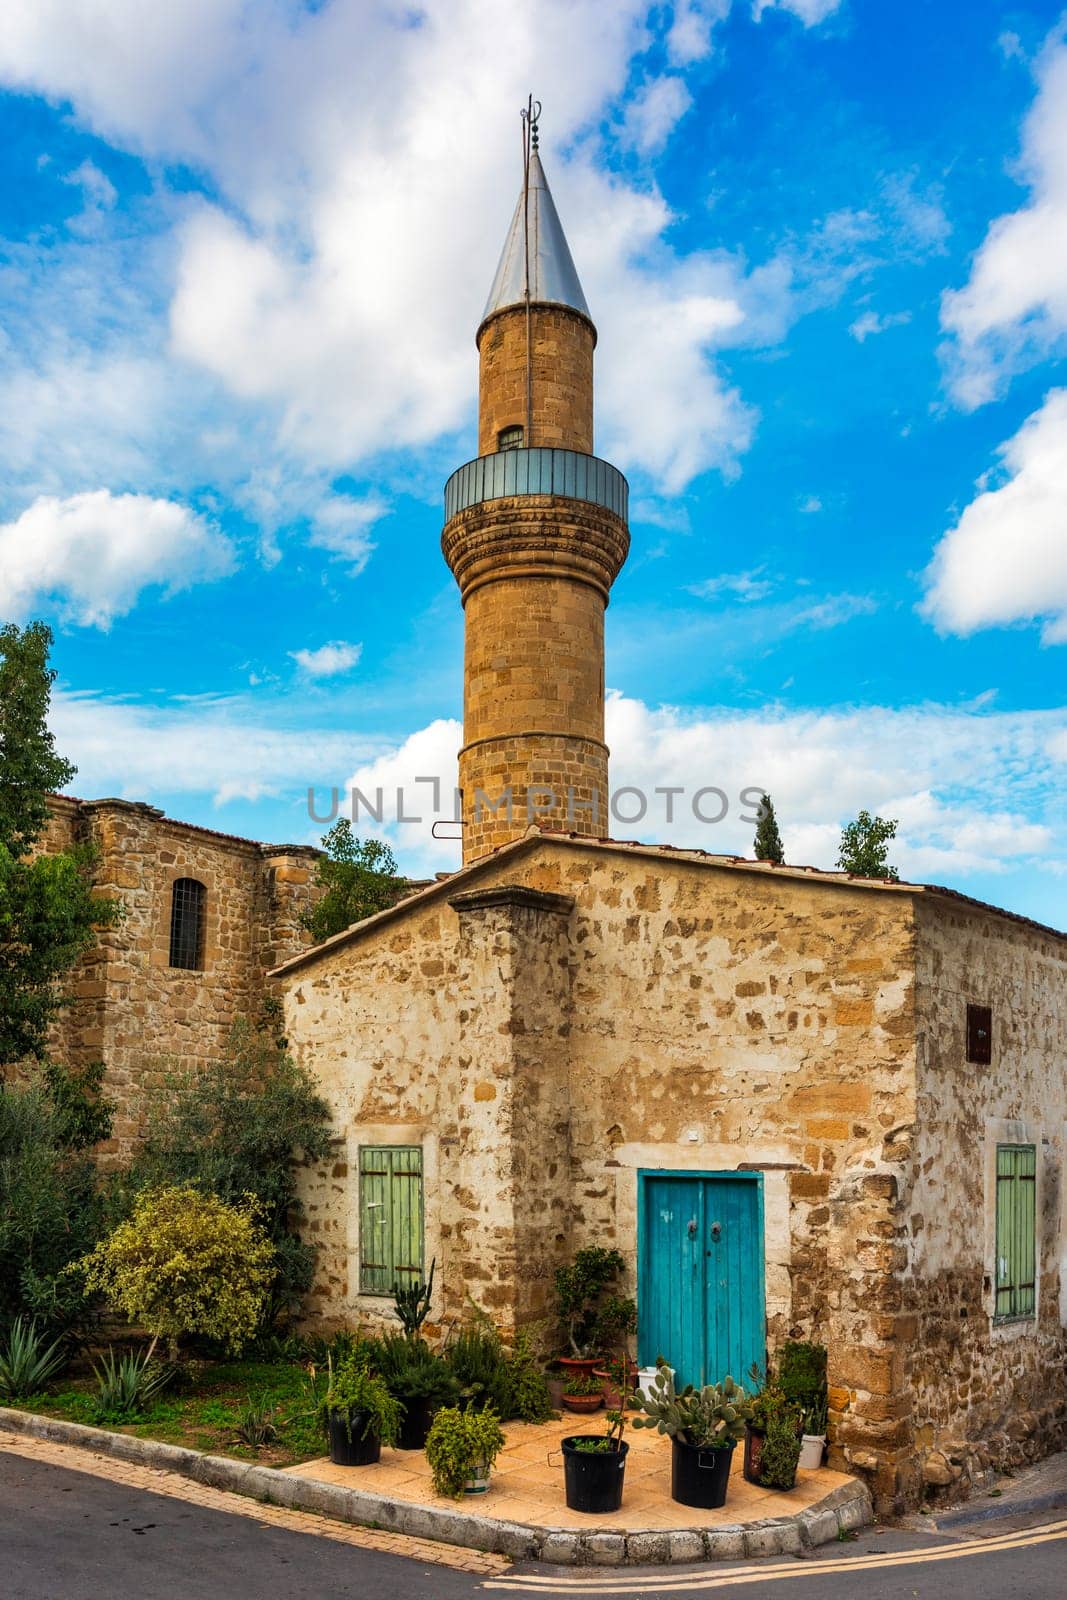 A small building with a blue door sits in front of a large Mosque with a tall tower in Nicosia, Cyprus. Beautiful street with old architecture in Nicosia, Cyprus.